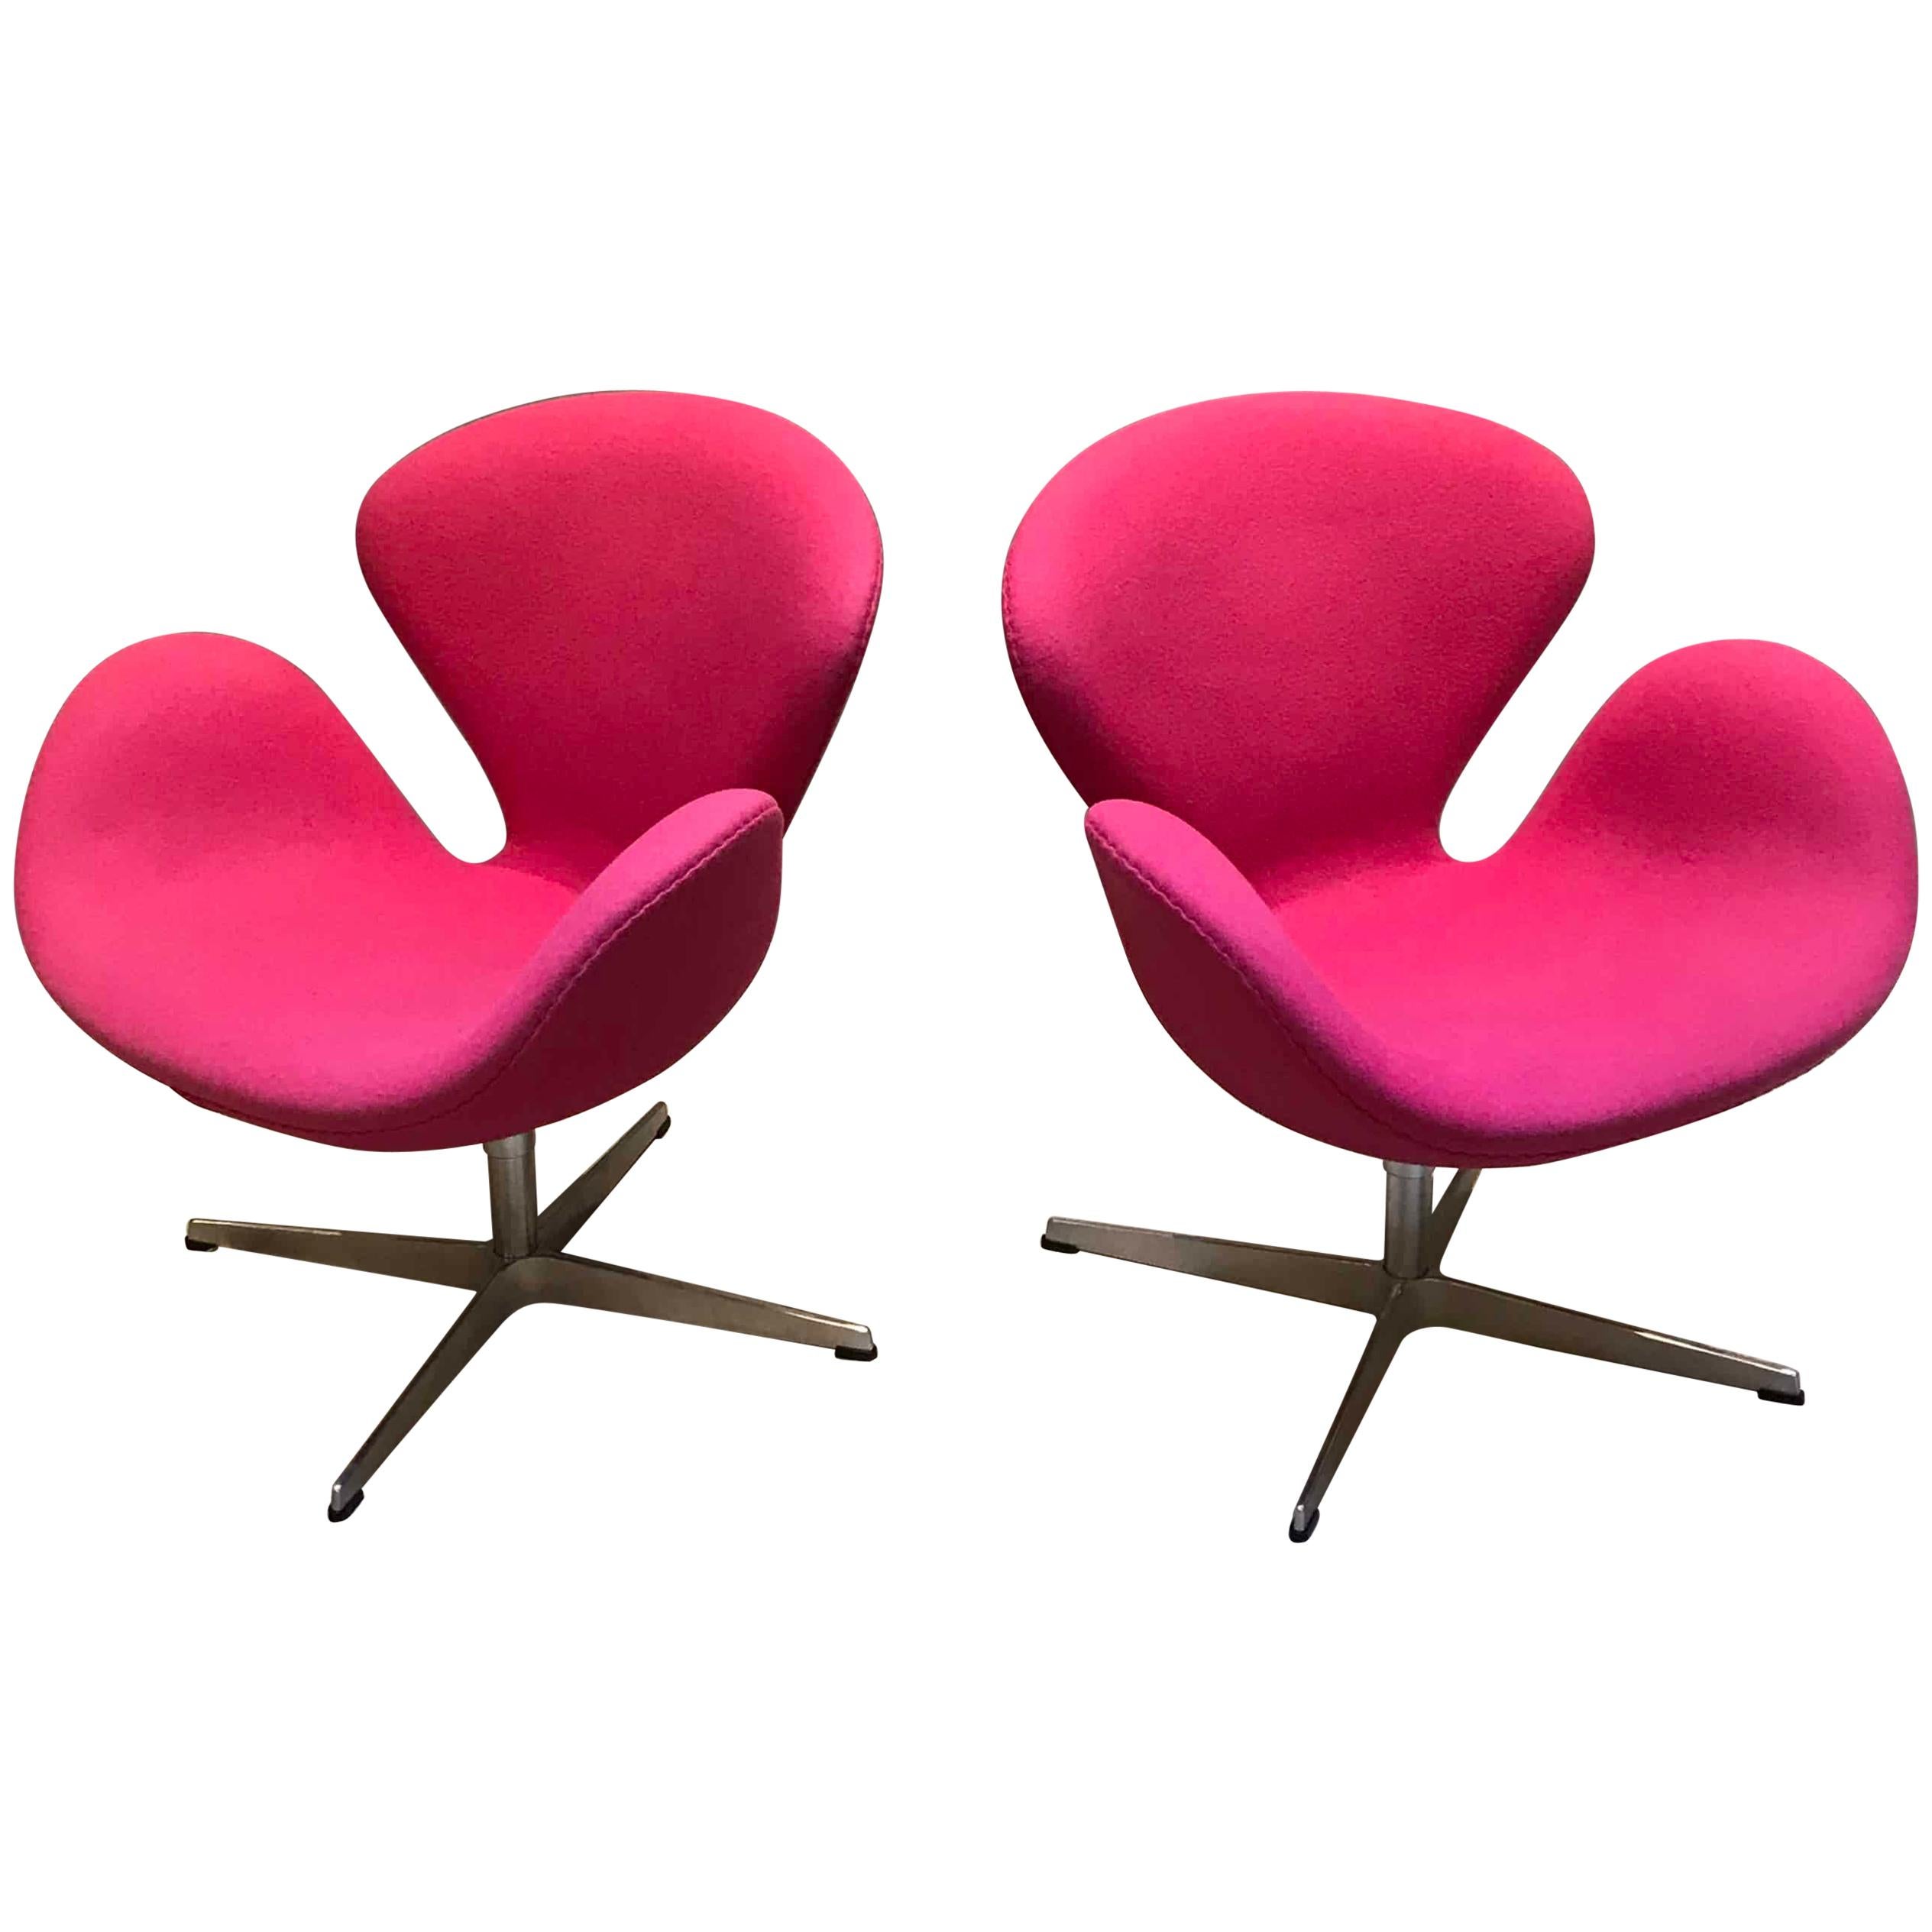 Lilac Swan Chairs by Arne Jacobsen